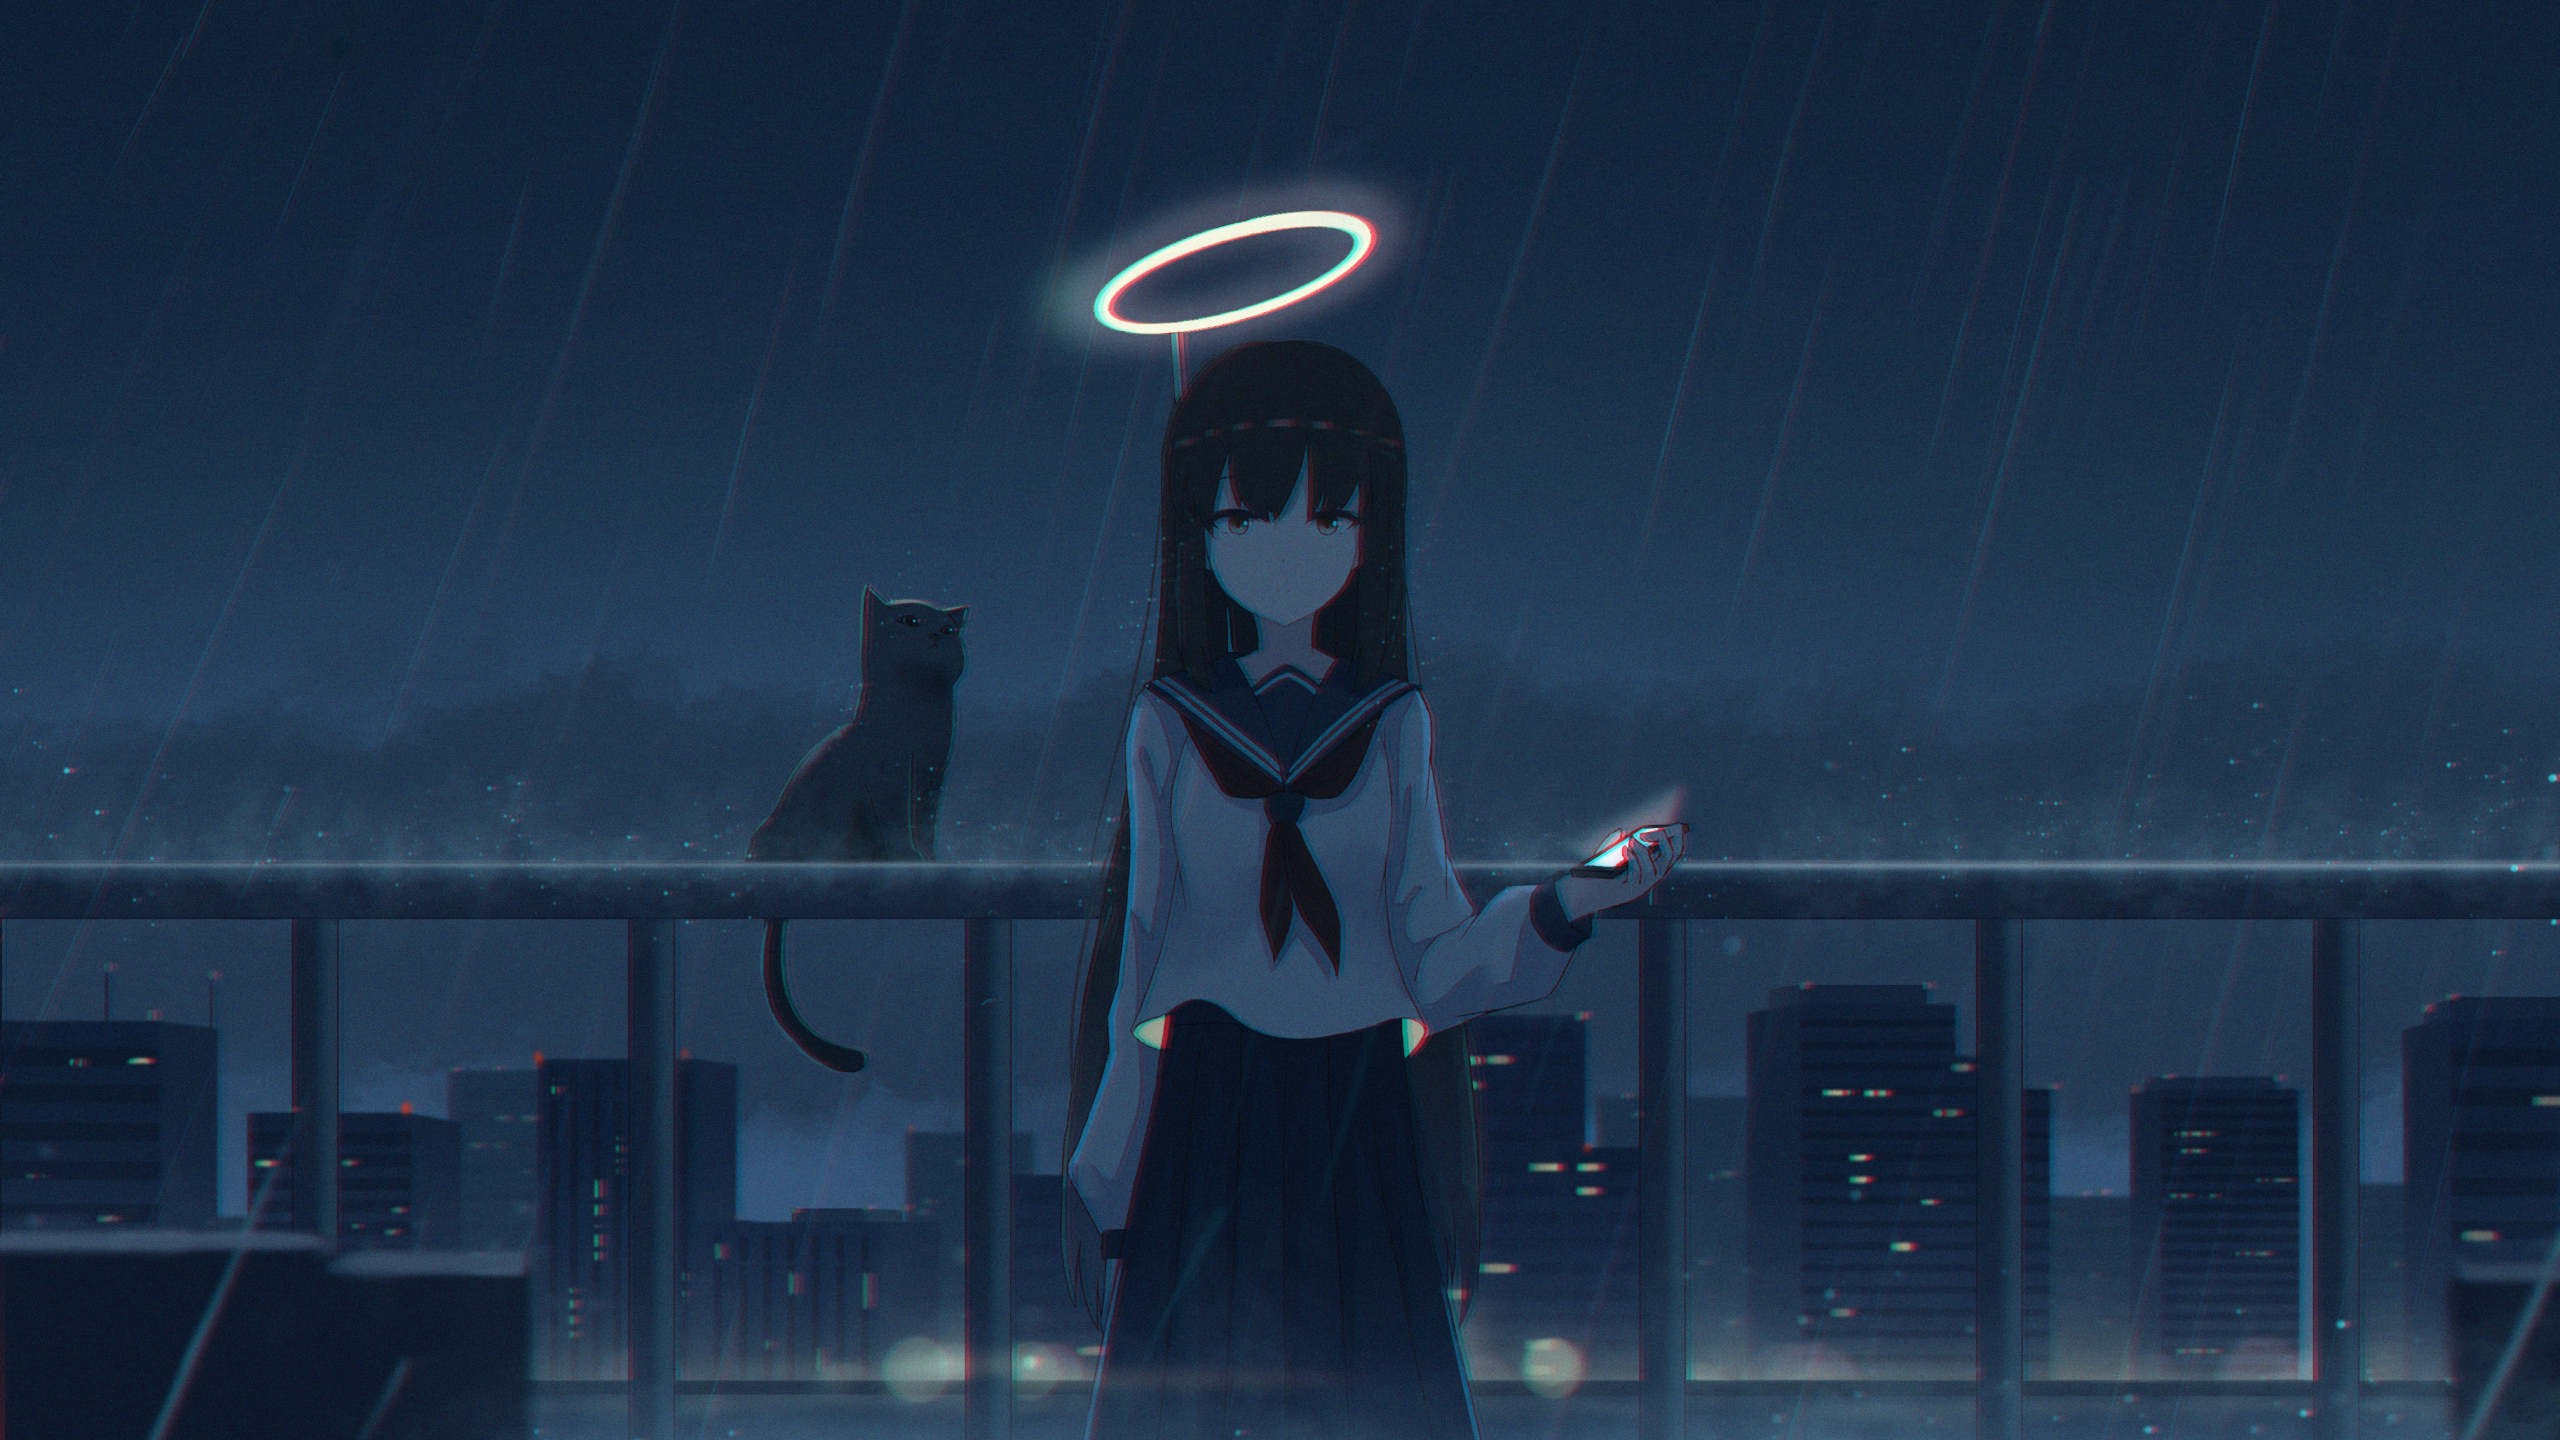 2560x1440 4k Girl In The Rain With Cat 1440p Resolution Wallpaper Hd Anime 4k Wallpapers Images Photos And Background